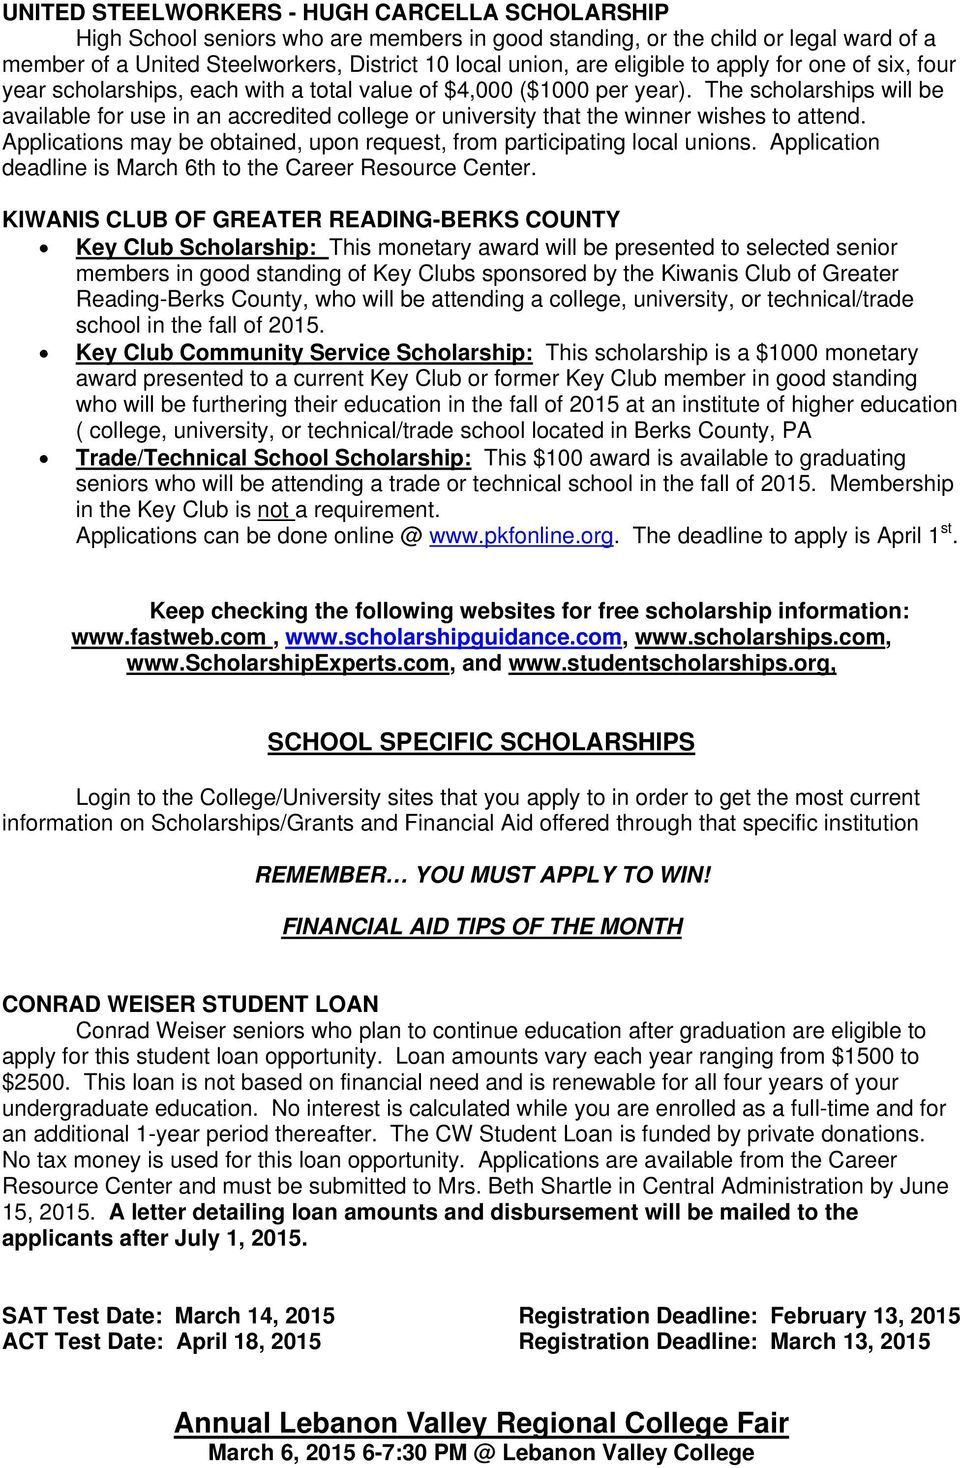 The scholarships will be available for use in an accredited college or university that the winner wishes to attend. Applications may be obtained, upon request, from participating local unions.